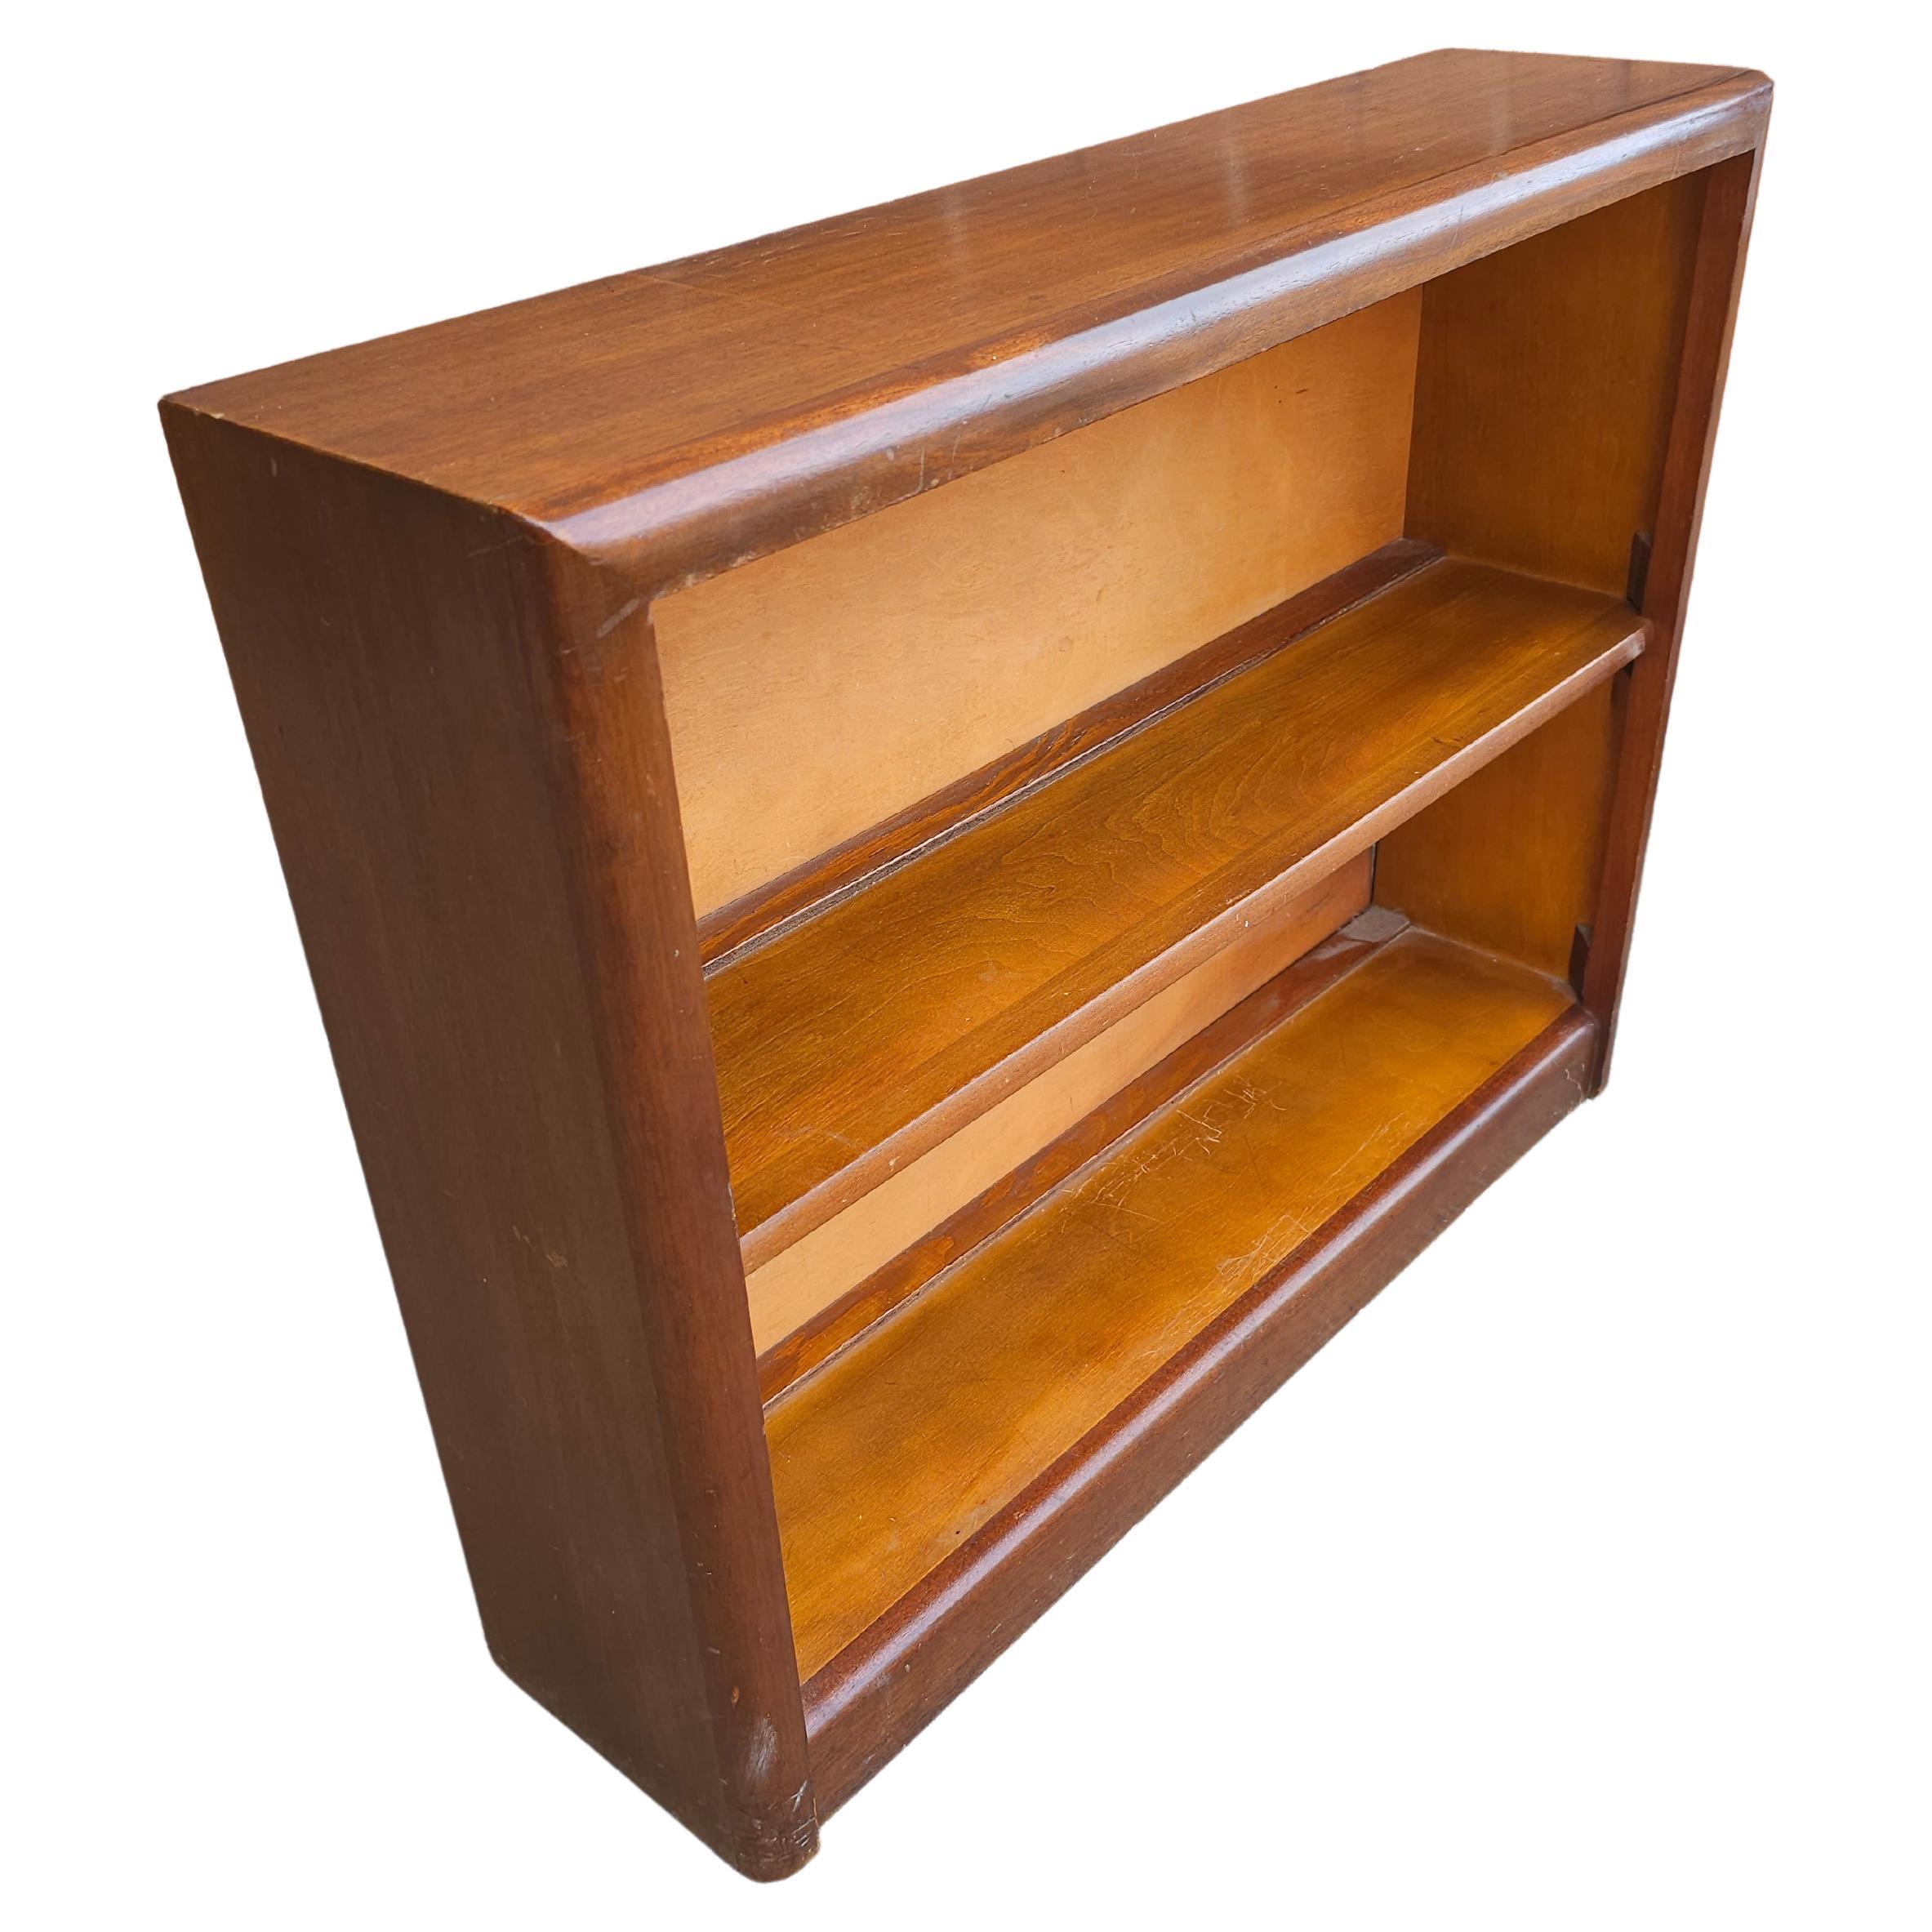 American Mid-20th Century Solid Mahogany Encyclopedia Low Bookcase, Circa 1960s For Sale